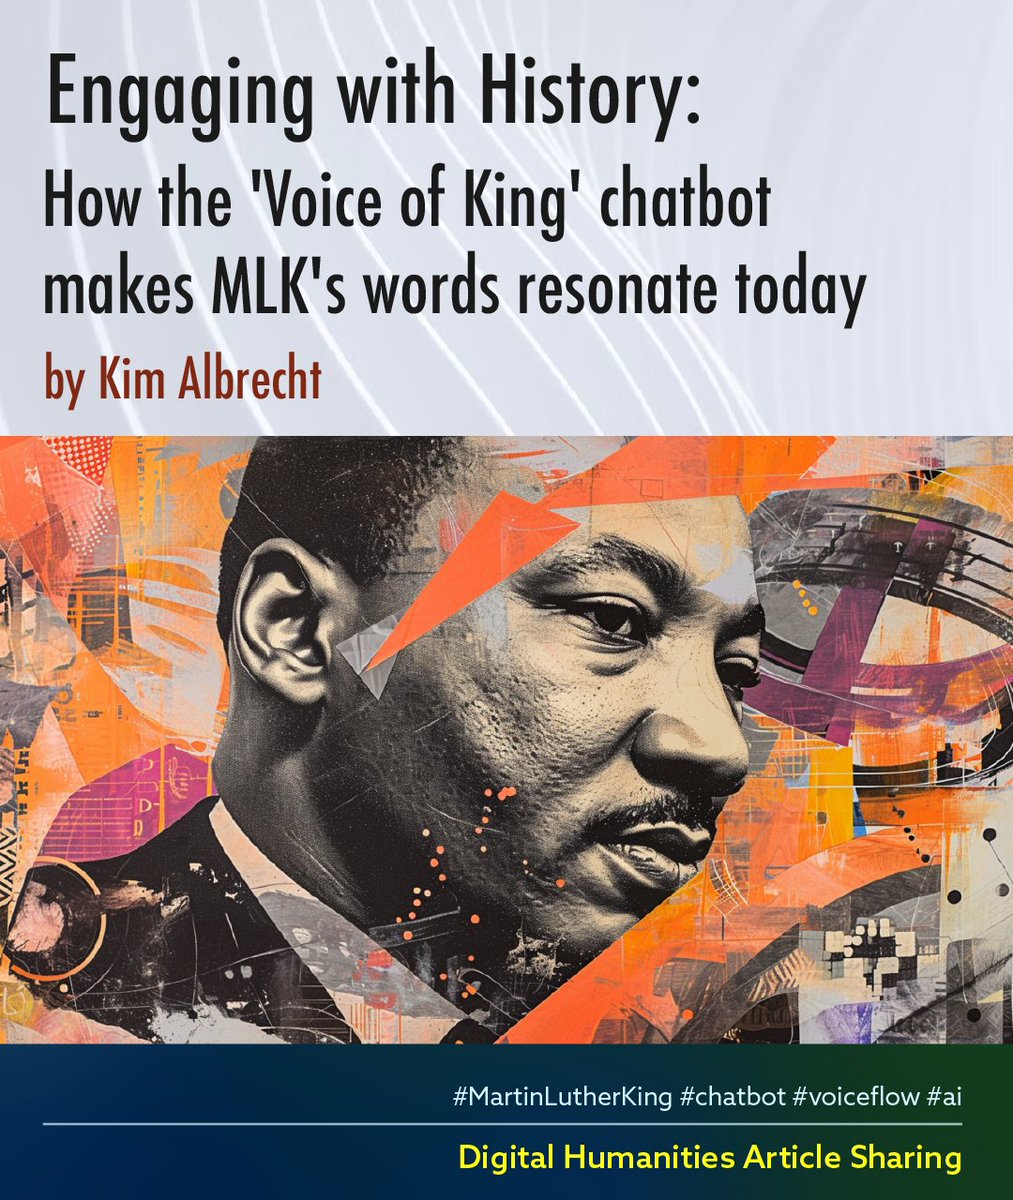 Sharing a fun project that combines the repository of Dr. King's speeches and writings with GAI chatbot! ✊🏾🤖

--
[𝗮𝗿𝘁𝗶𝗰𝗹𝗲 𝘀𝗵𝗮𝗿𝗶𝗻𝗴✨] 🔖

by Tarik Moody
linkedin.com/pulse/engaging…

#digitalHumanities #GAI #chatbot #MartinLutherKing